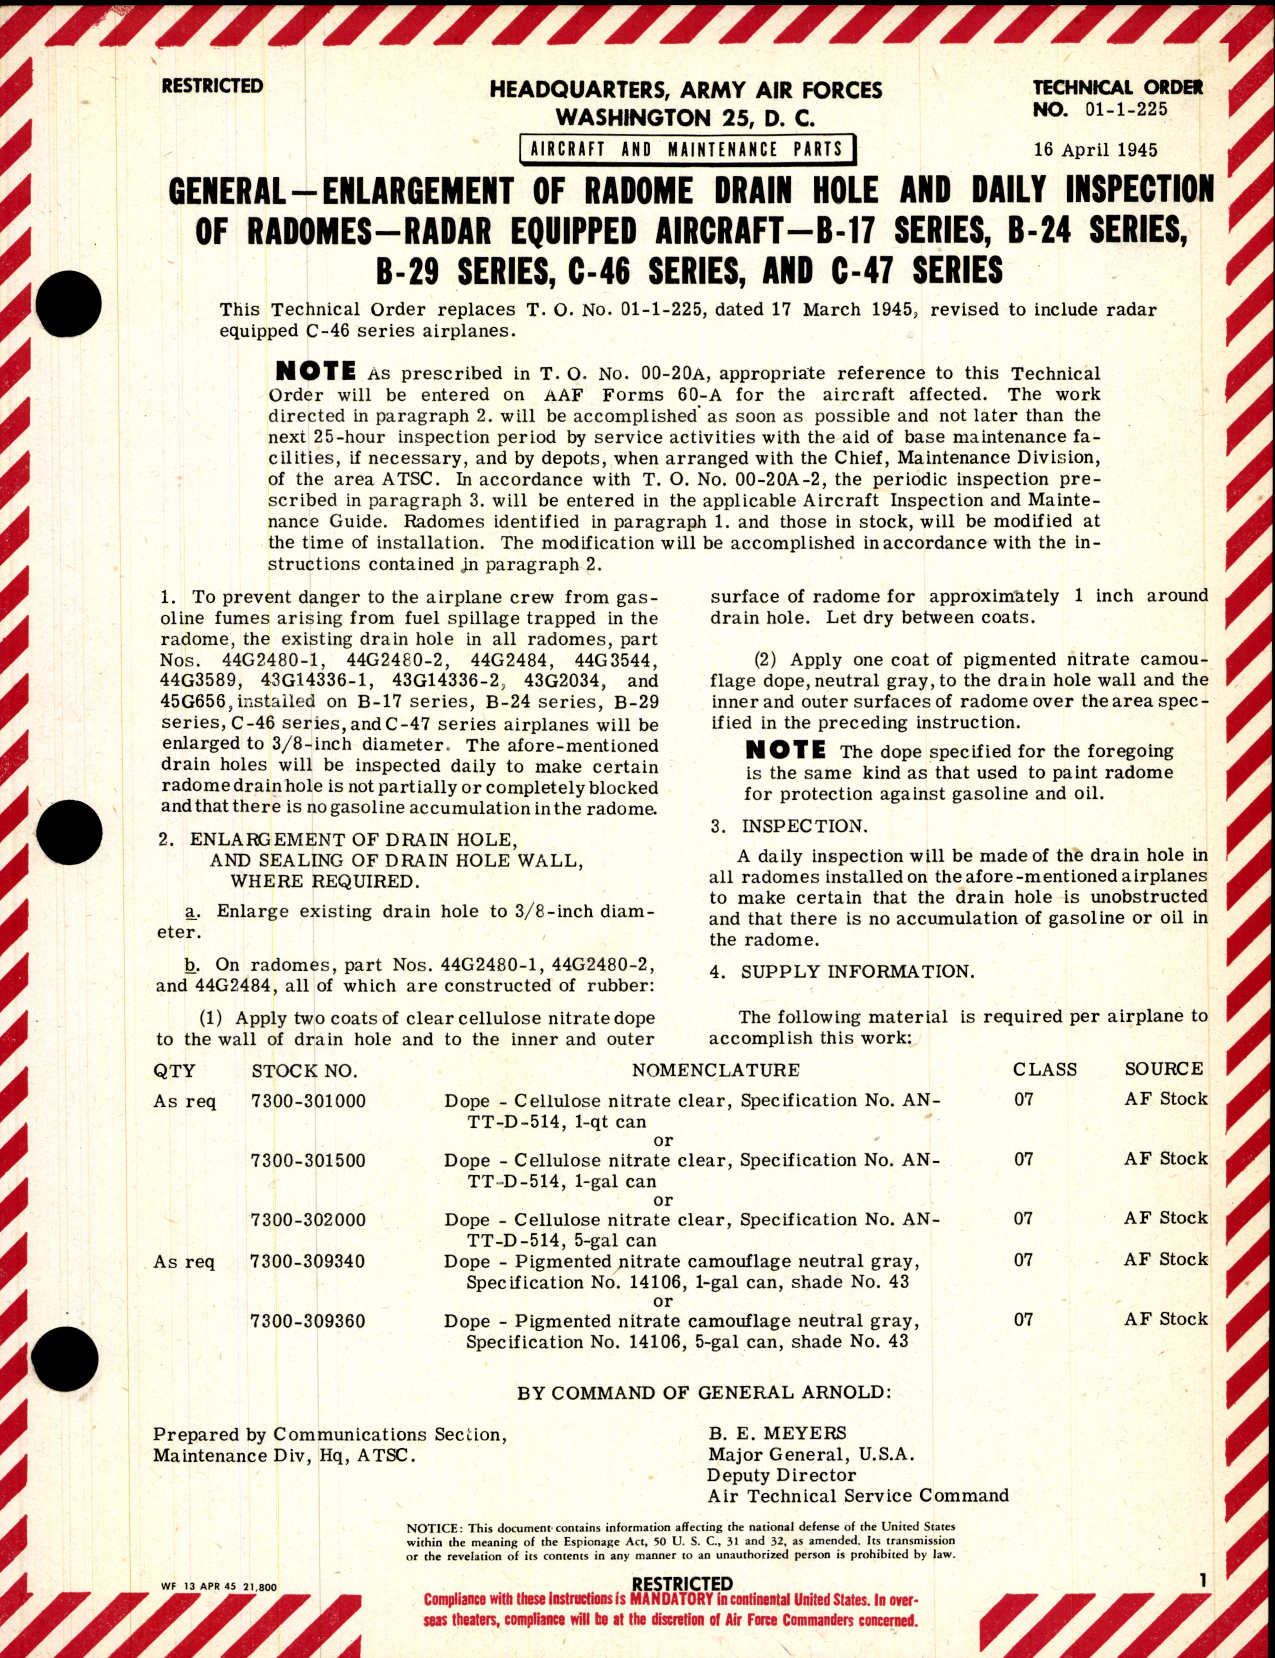 Sample page 1 from AirCorps Library document: Aircraft and Maintenance Parts; Enlargement of Radome Drain Hole and Daily Inspection of Radomes-Radar Equipped Aircraft